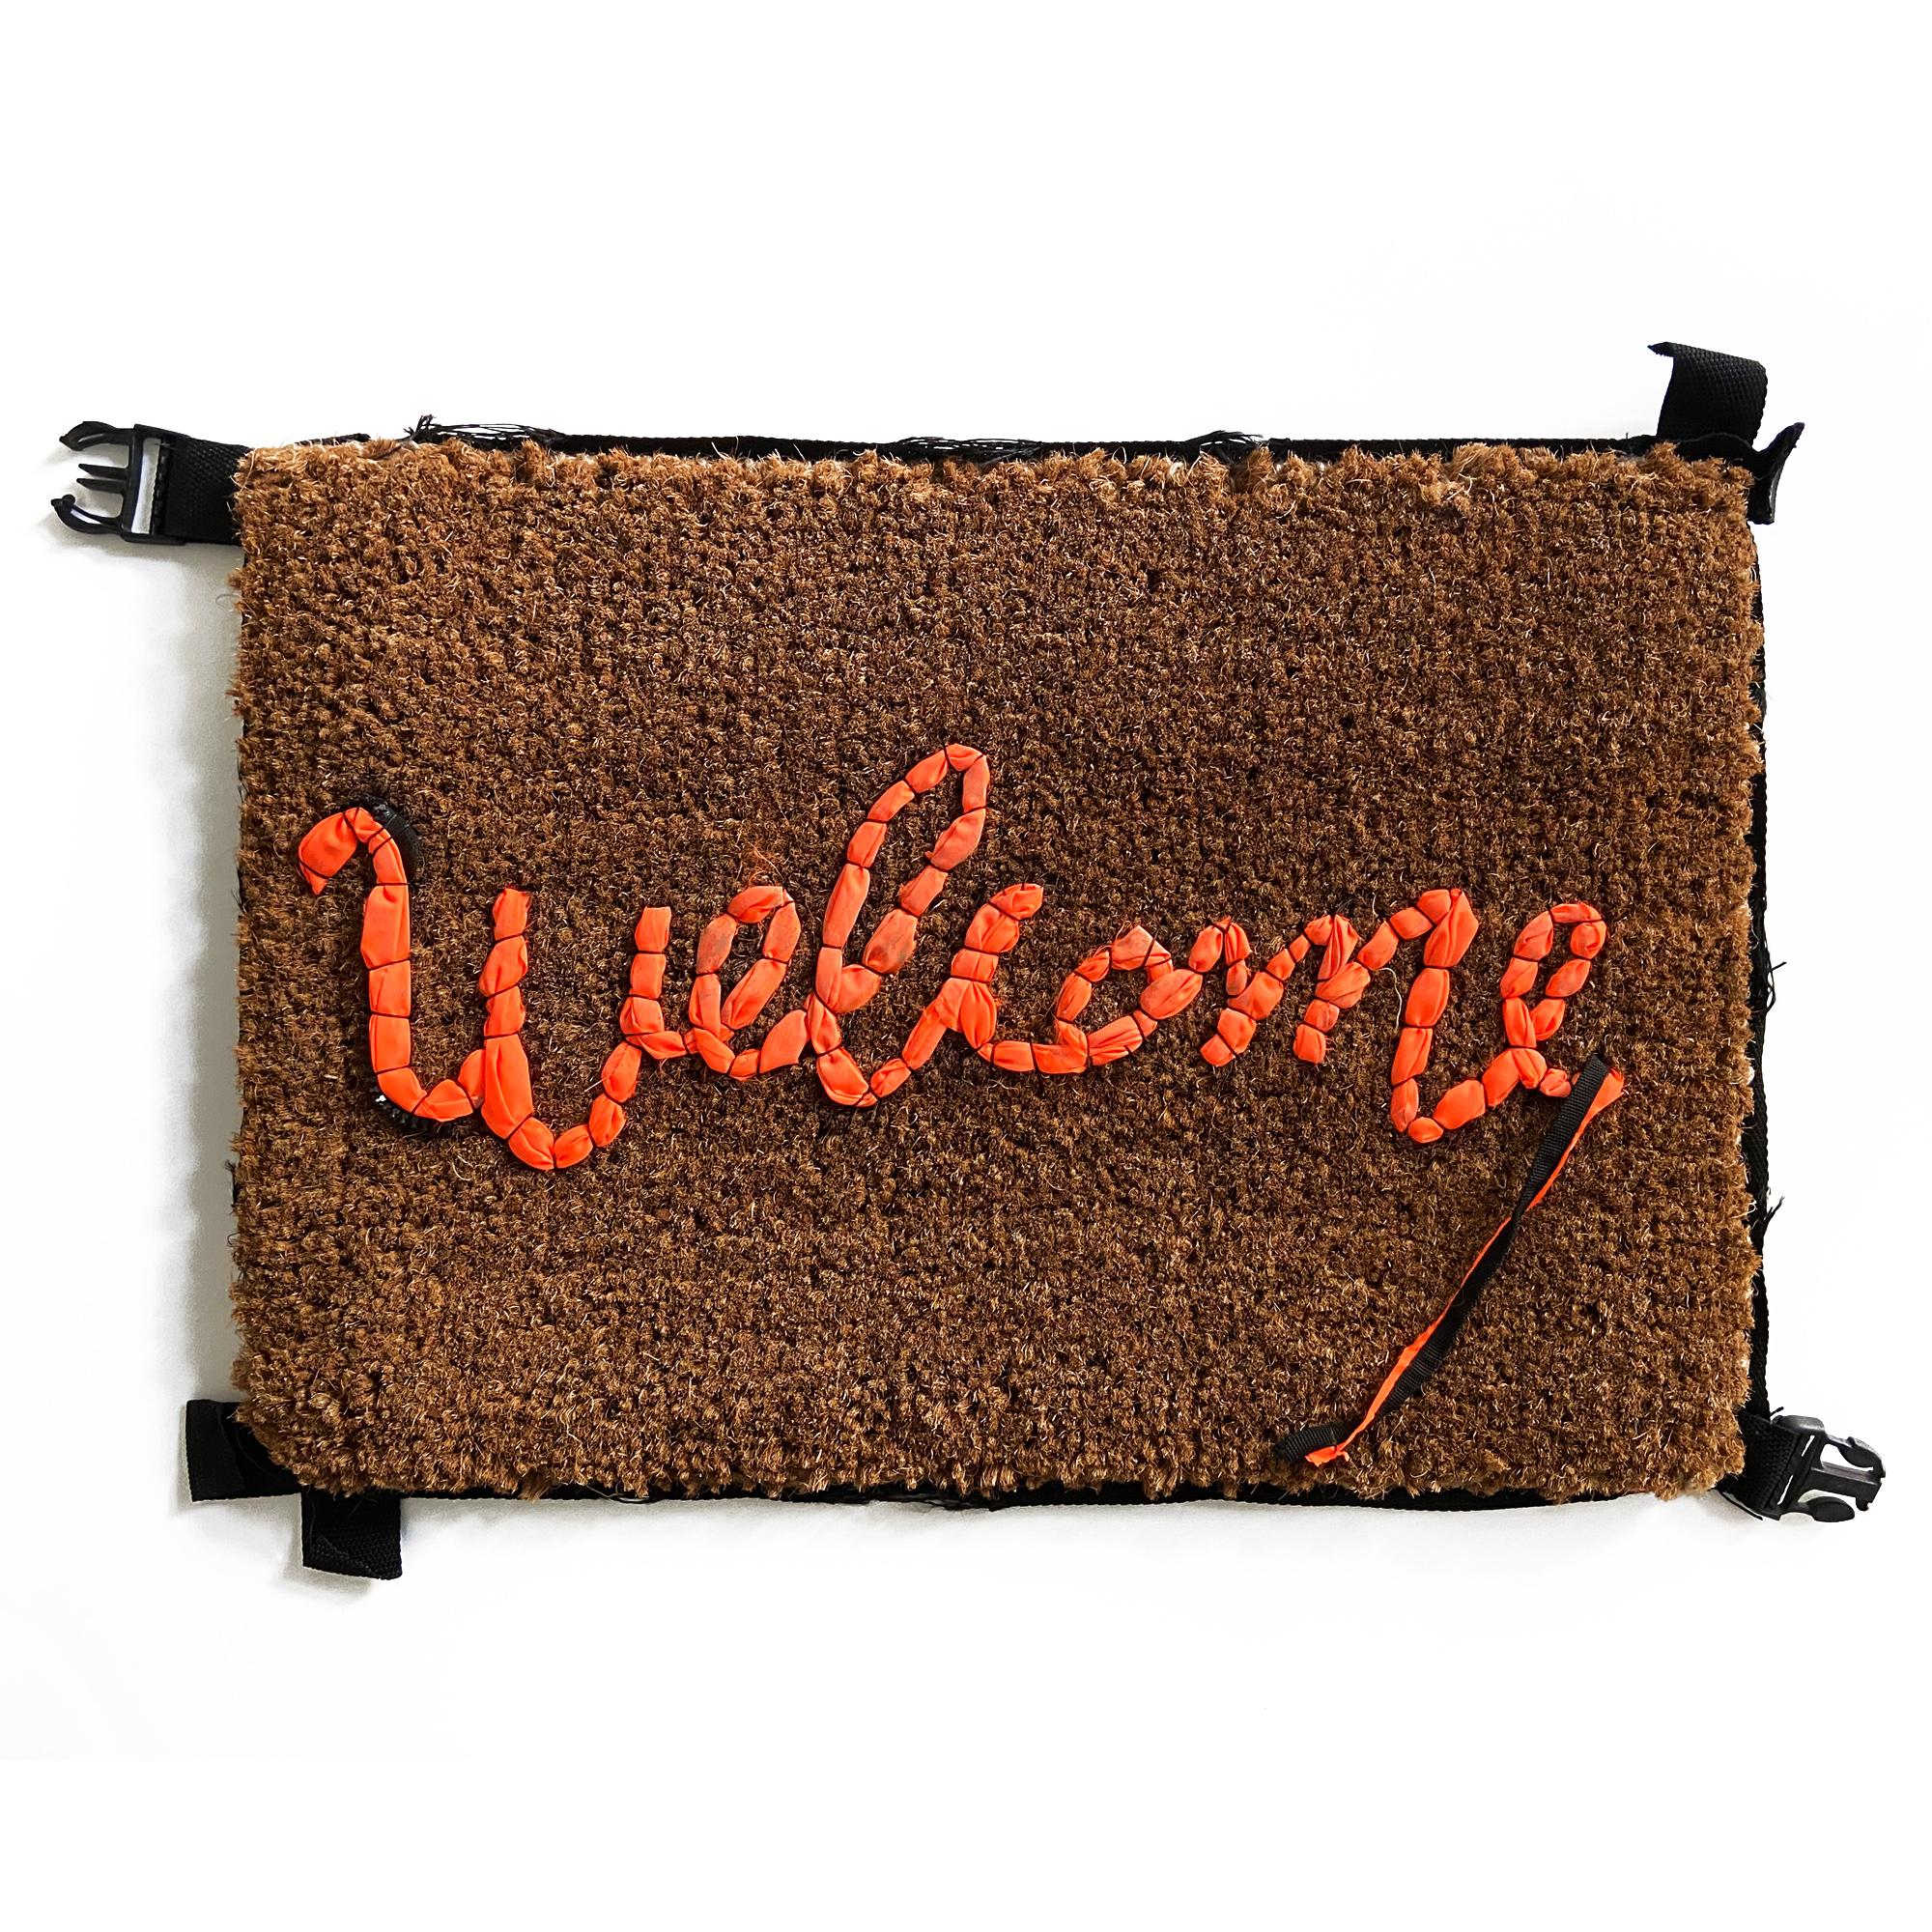 Banksy (British street artist)
Welcome Mat, 2020
Medium: Doormat and refugee life vest 
Dimensions: 24.6 x 17.7 x 1.4 in (62.5 x 45.0 x 3.5 cm)
Edition size: undisclosed
Markings: Numbered on official Gross Domestic Product label (photograph of